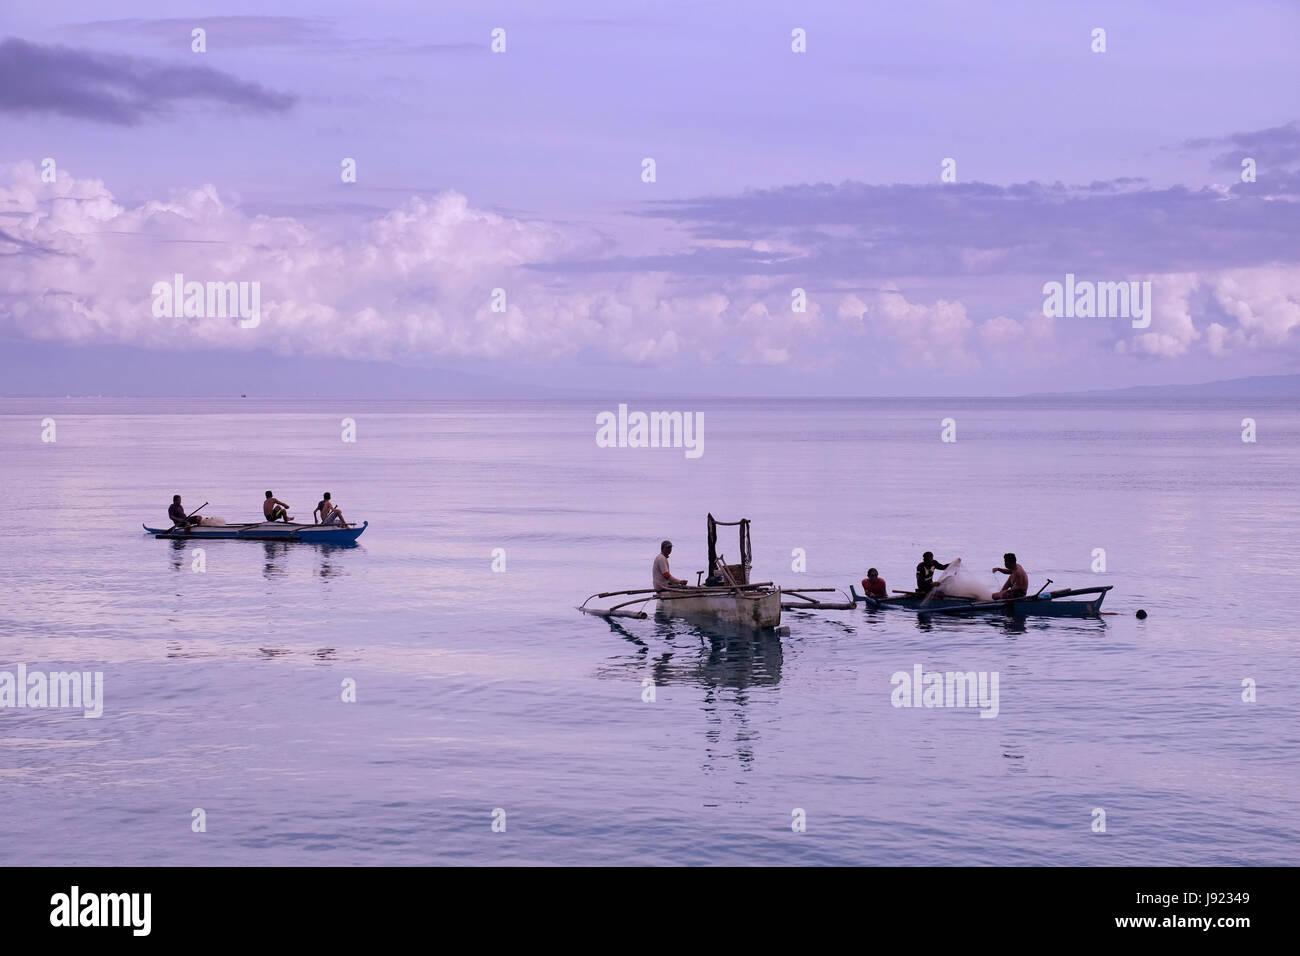 Fishermen in traditional banka outrigger boats in the island of Siquijor located in the Central Visayas region of the Philippines Stock Photo